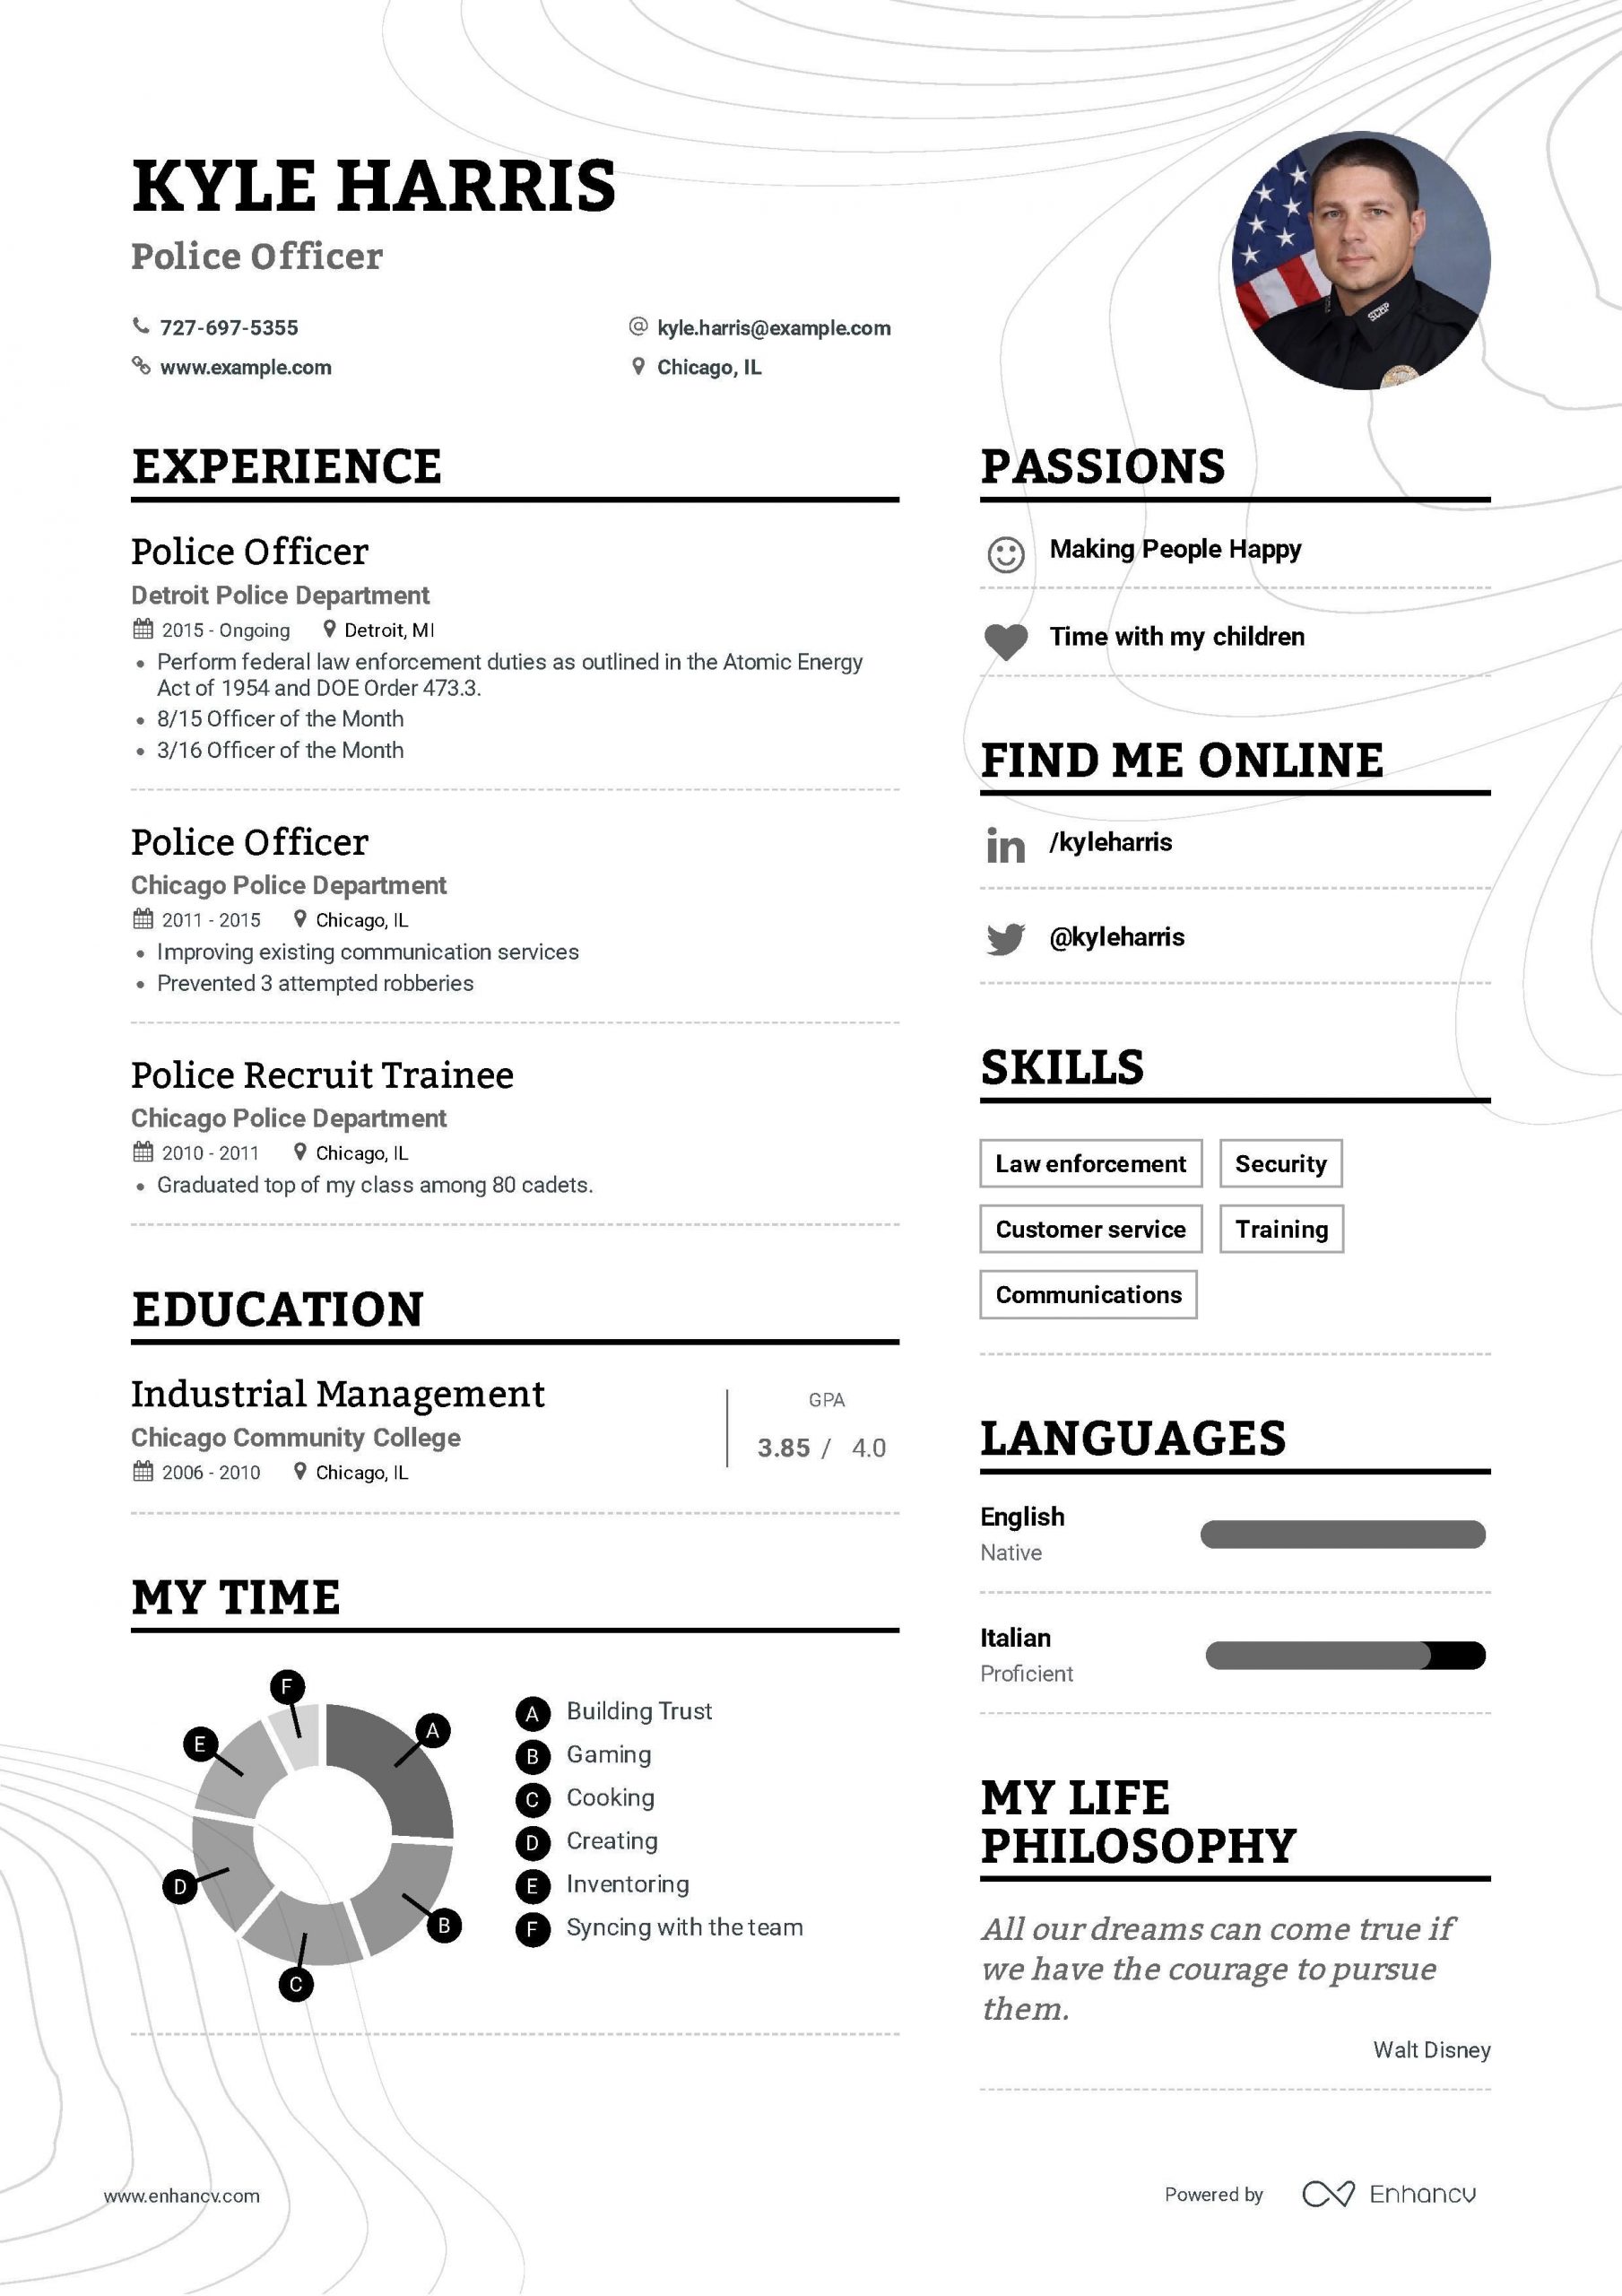 Sample Resume for Police Officer Job Police Officer Resume Example and Guide for 2019 – Law Enforcement …